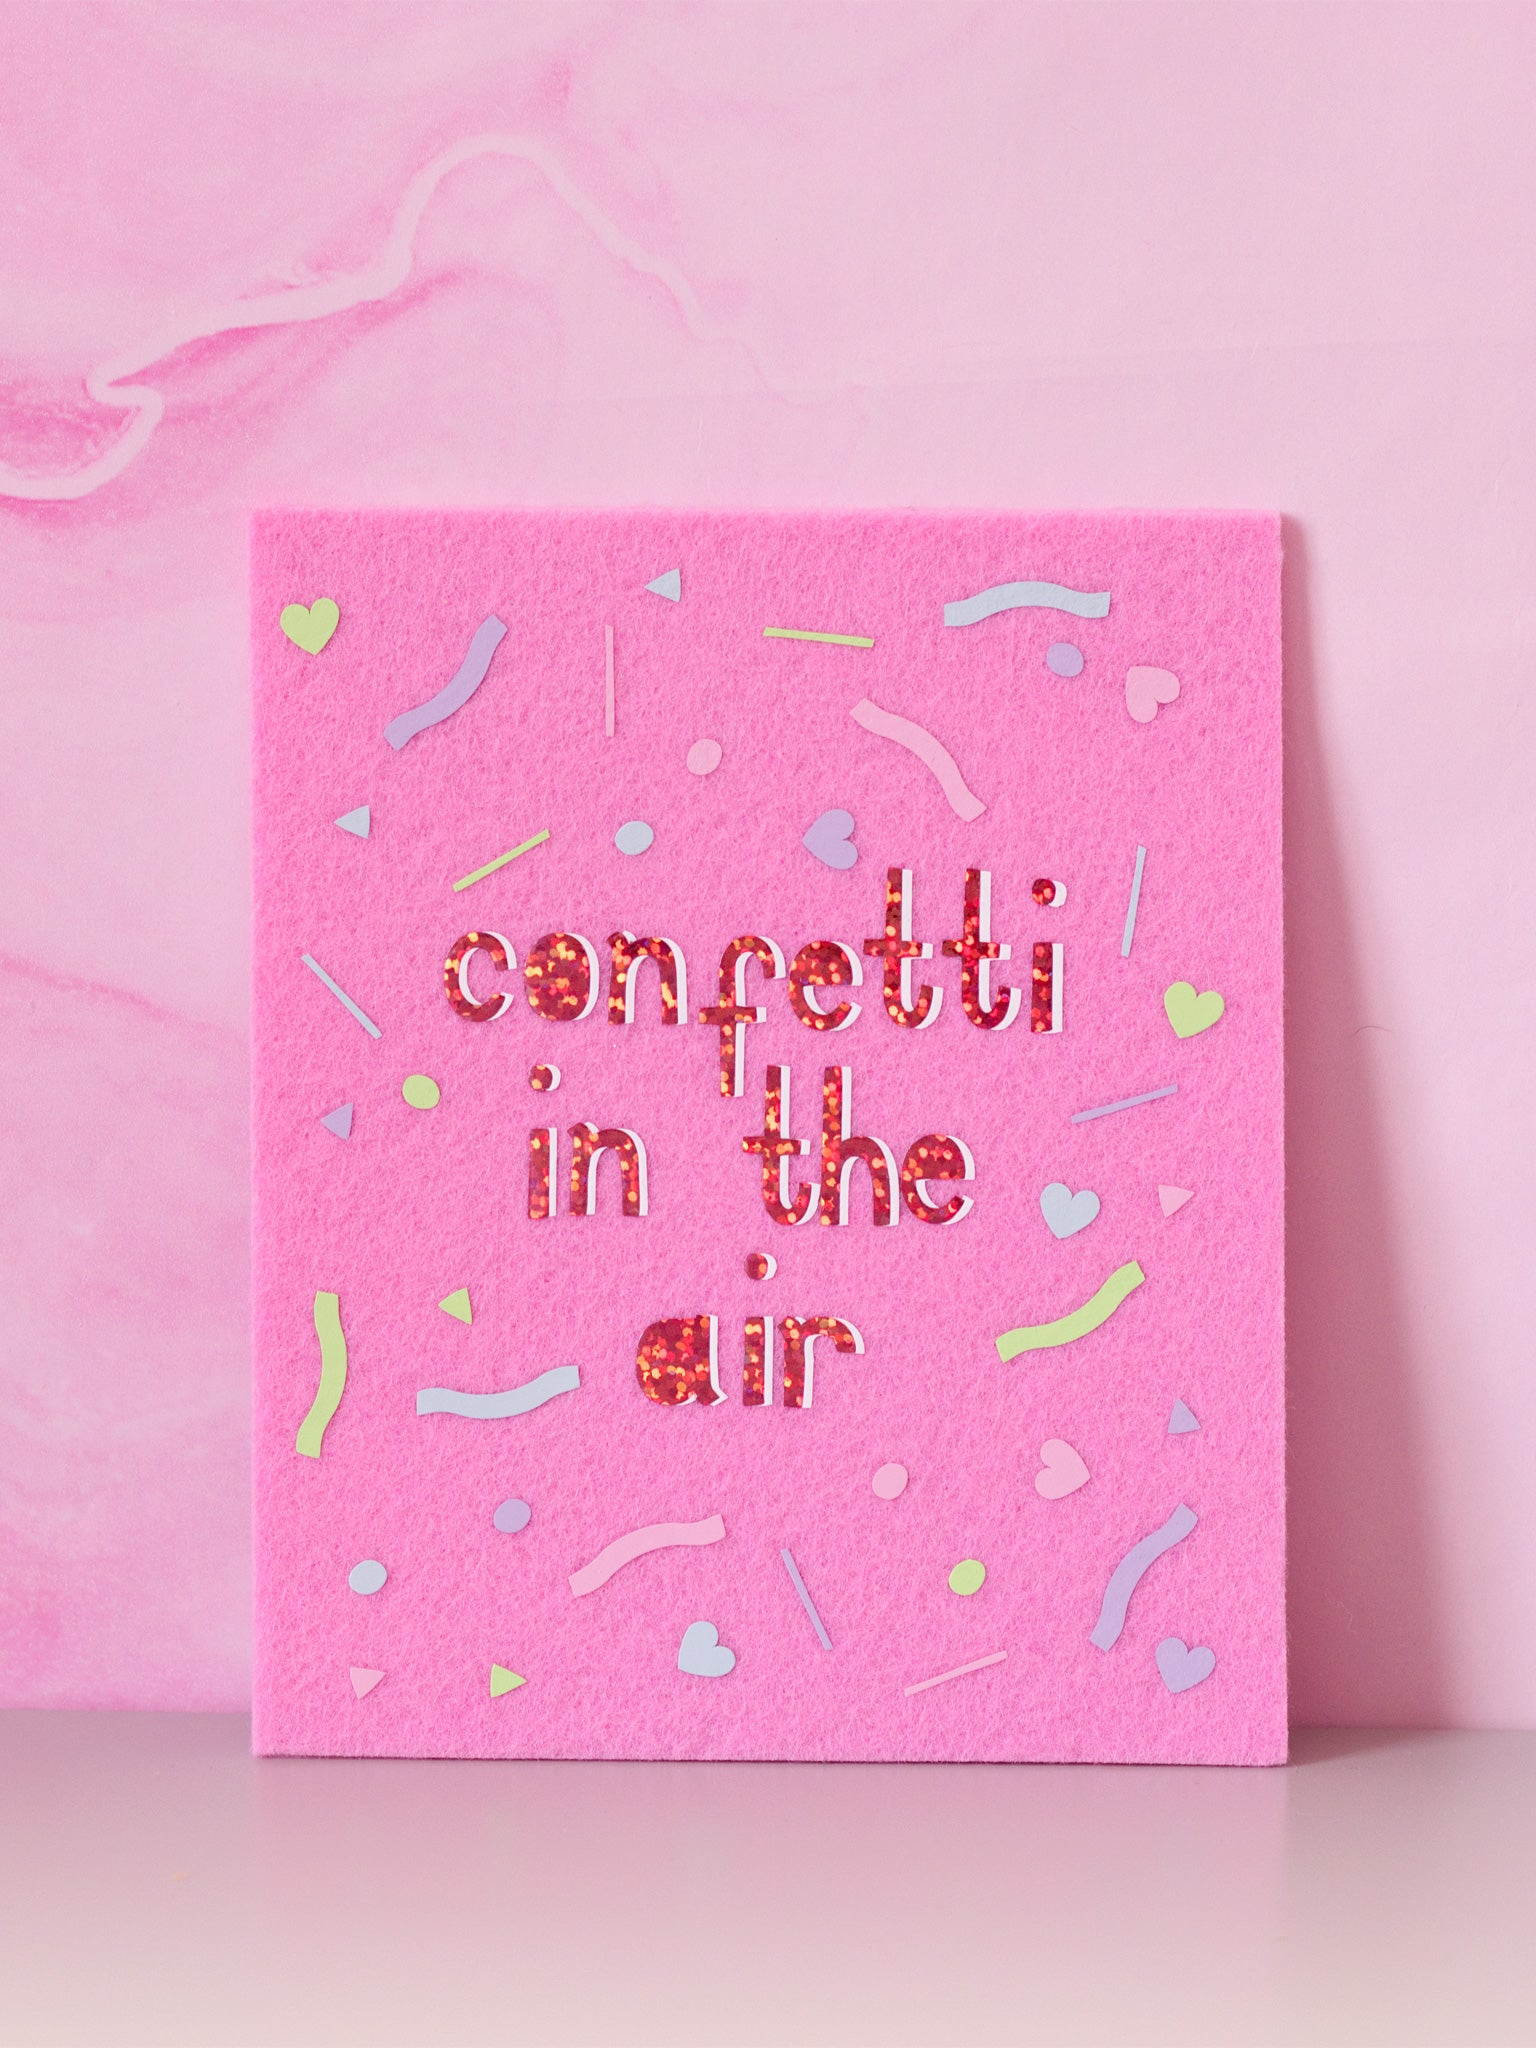 Felt wall art with Confetti In The Air written in glitter vinyl with pastel confetti shapes surrounding the text, sitting in front of a marbled pink wall.